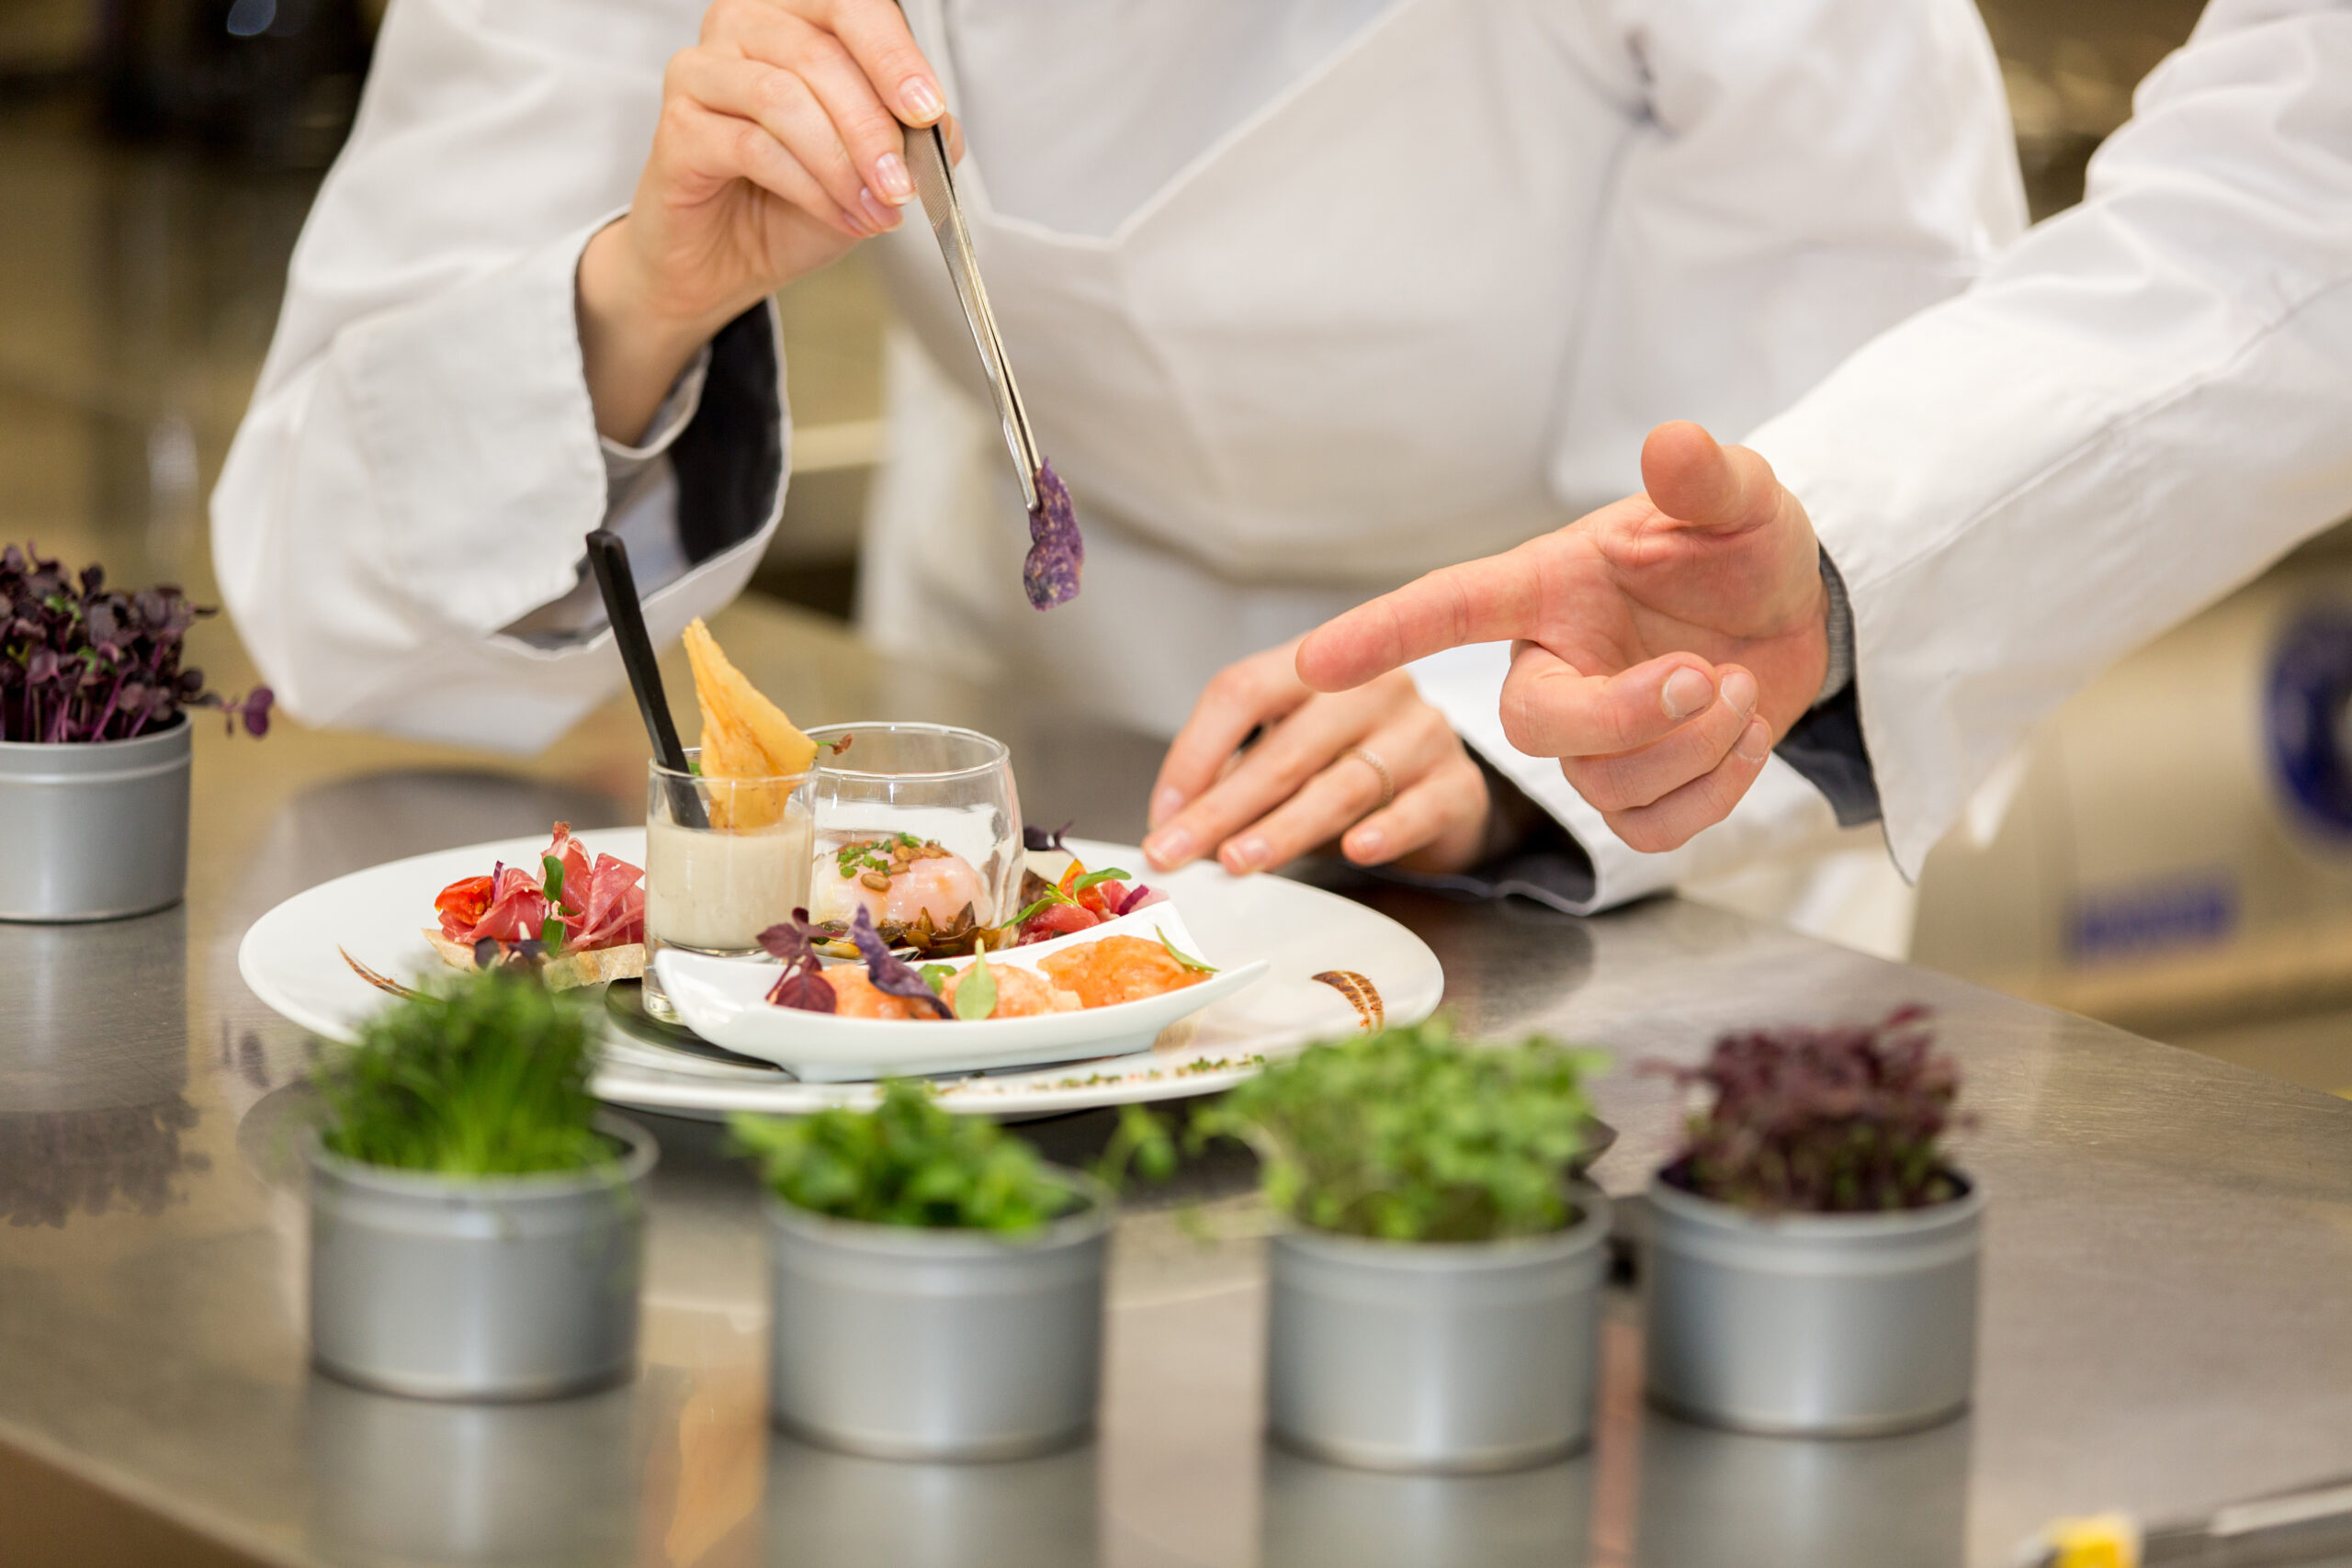 Why should you search for the best hospitality jobs in the UK?